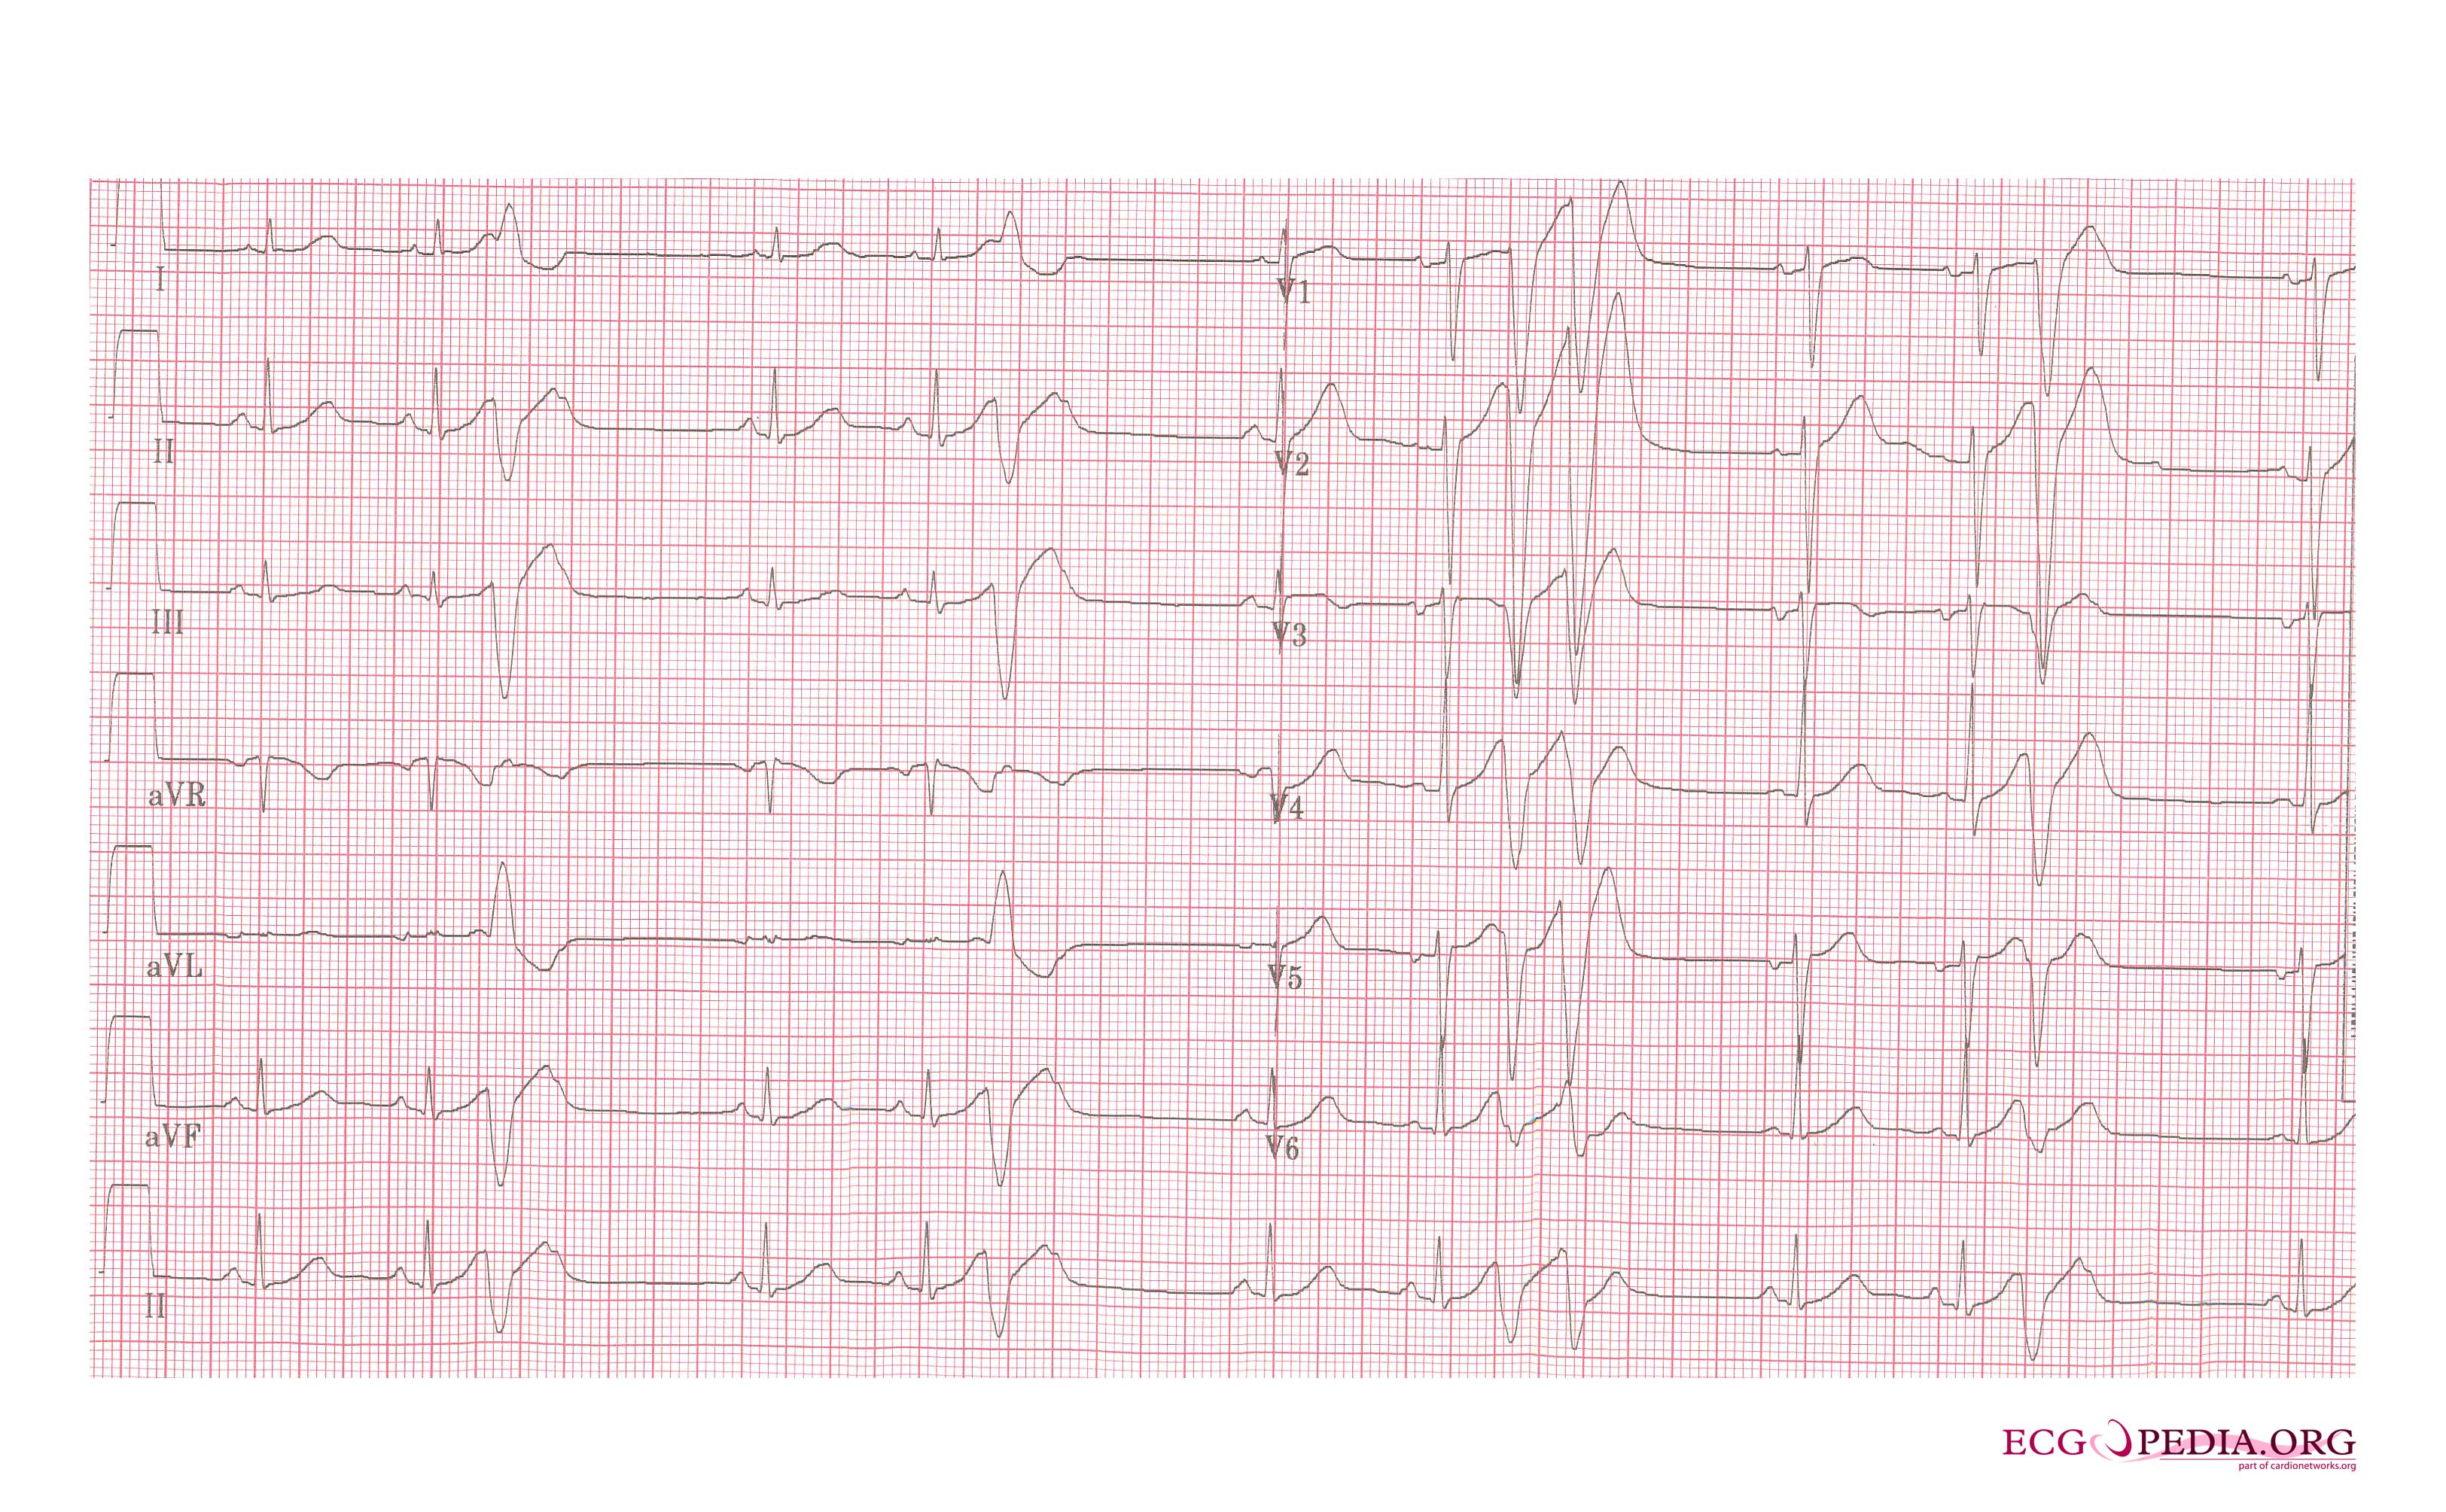 Arrhythmias in a patient with short coupled torsade de pointes: frequent short coupled extrasystoles[6]